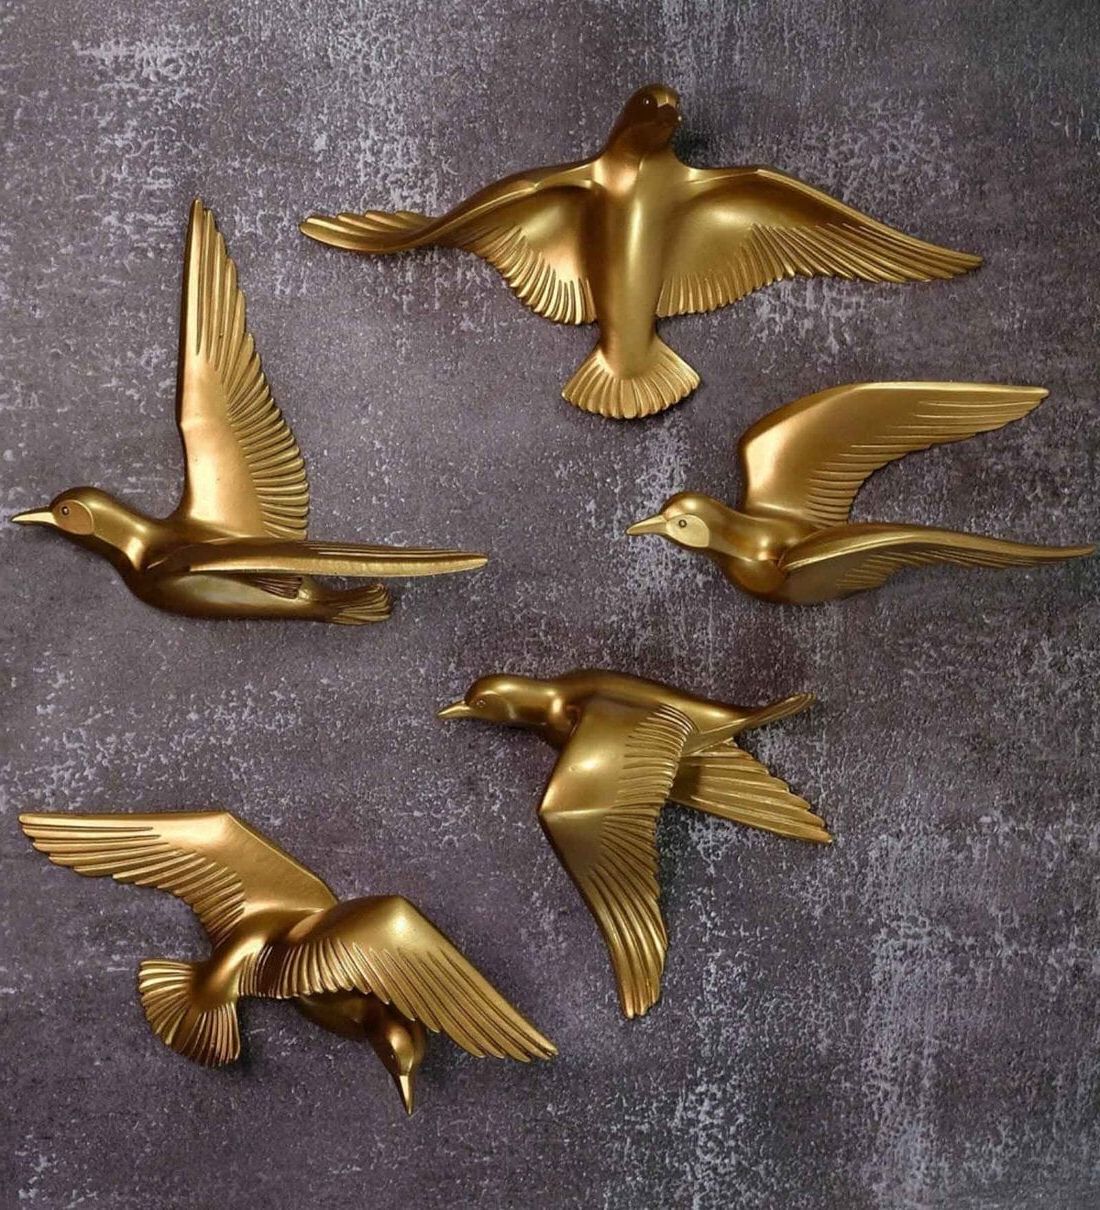 [%buy Metal Birds Wall Hanging – Set Of 5  Writings On The Wall At 48%  Offwritings On The Wall | Pepperfry With Regard To Most Up To Date Metal Bird Wall Sculpture Wall Art|metal Bird Wall Sculpture Wall Art Throughout Best And Newest Buy Metal Birds Wall Hanging – Set Of 5  Writings On The Wall At 48%  Offwritings On The Wall | Pepperfry|most Current Metal Bird Wall Sculpture Wall Art Inside Buy Metal Birds Wall Hanging – Set Of 5  Writings On The Wall At 48%  Offwritings On The Wall | Pepperfry|best And Newest Buy Metal Birds Wall Hanging – Set Of 5  Writings On The Wall At 48%  Offwritings On The Wall | Pepperfry With Metal Bird Wall Sculpture Wall Art%] (View 10 of 15)